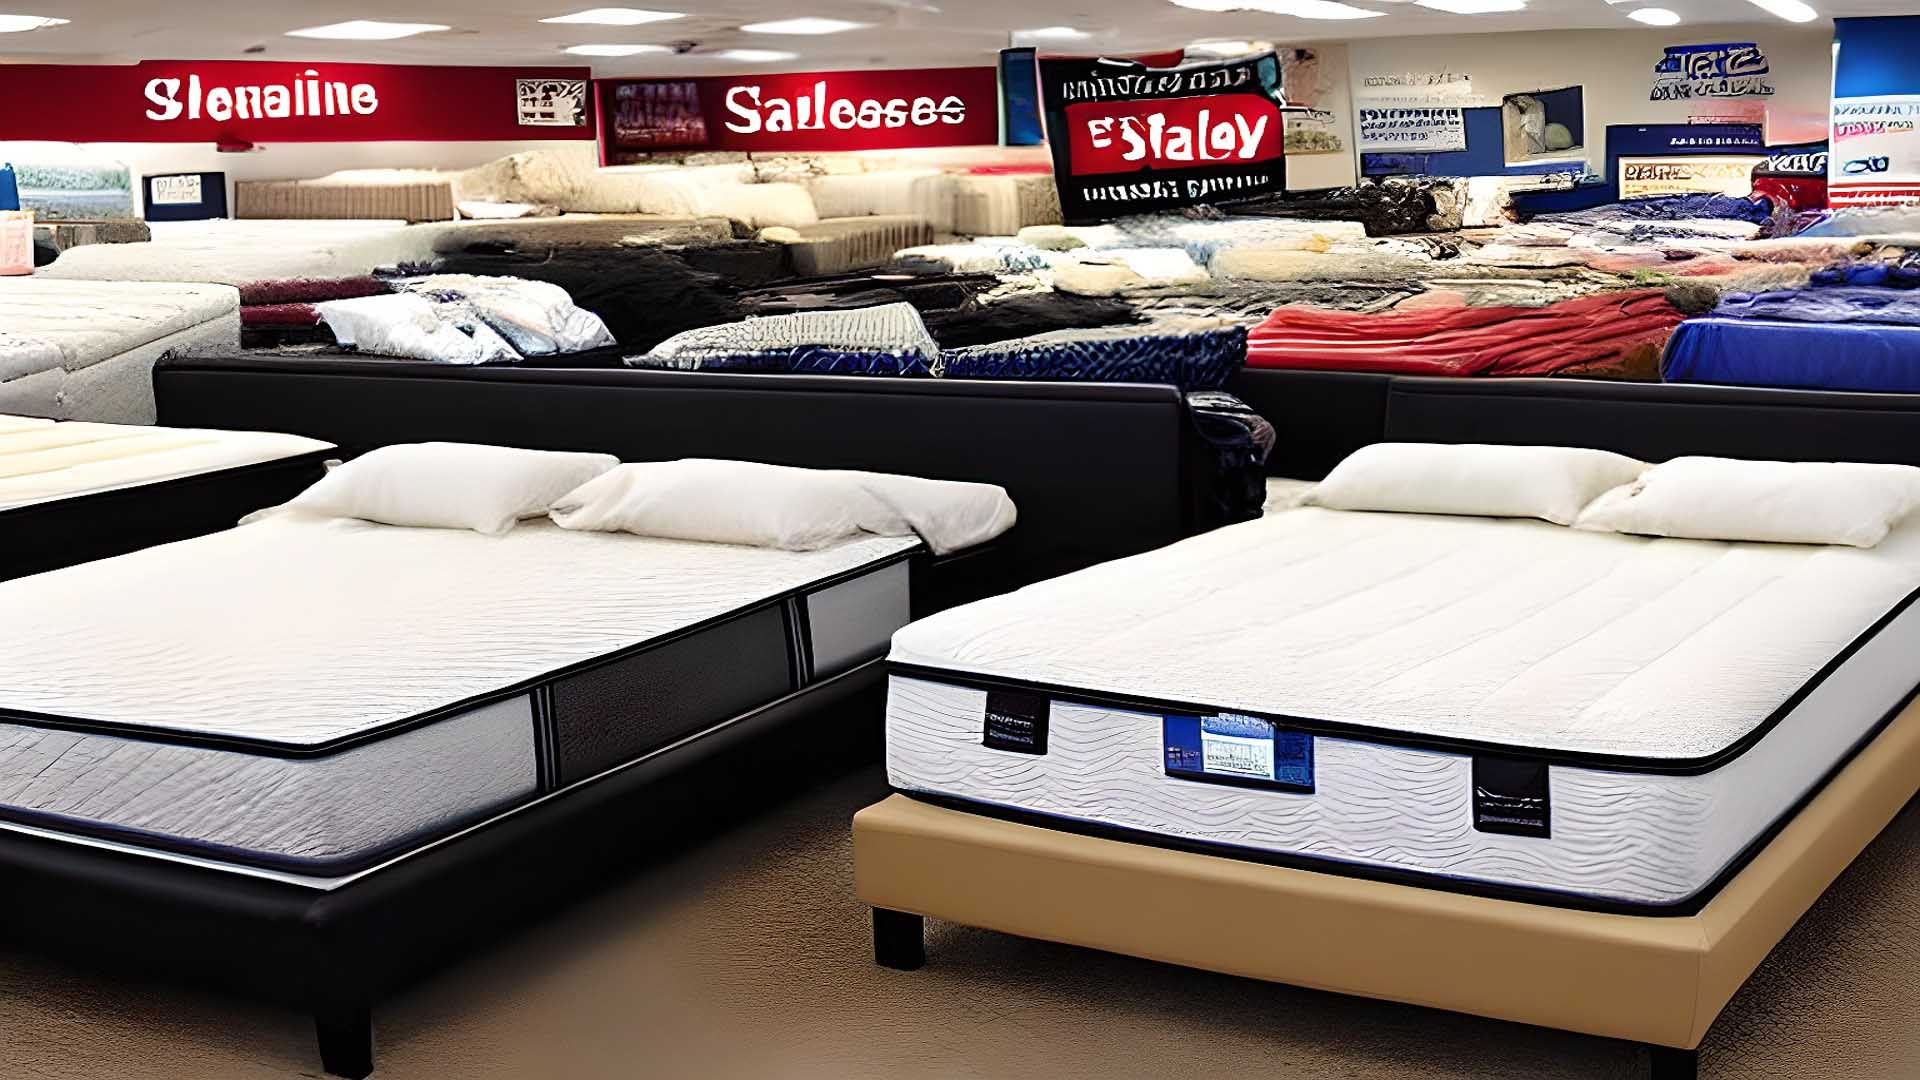 Mattress Sales & Deals in South Weymouth, MA